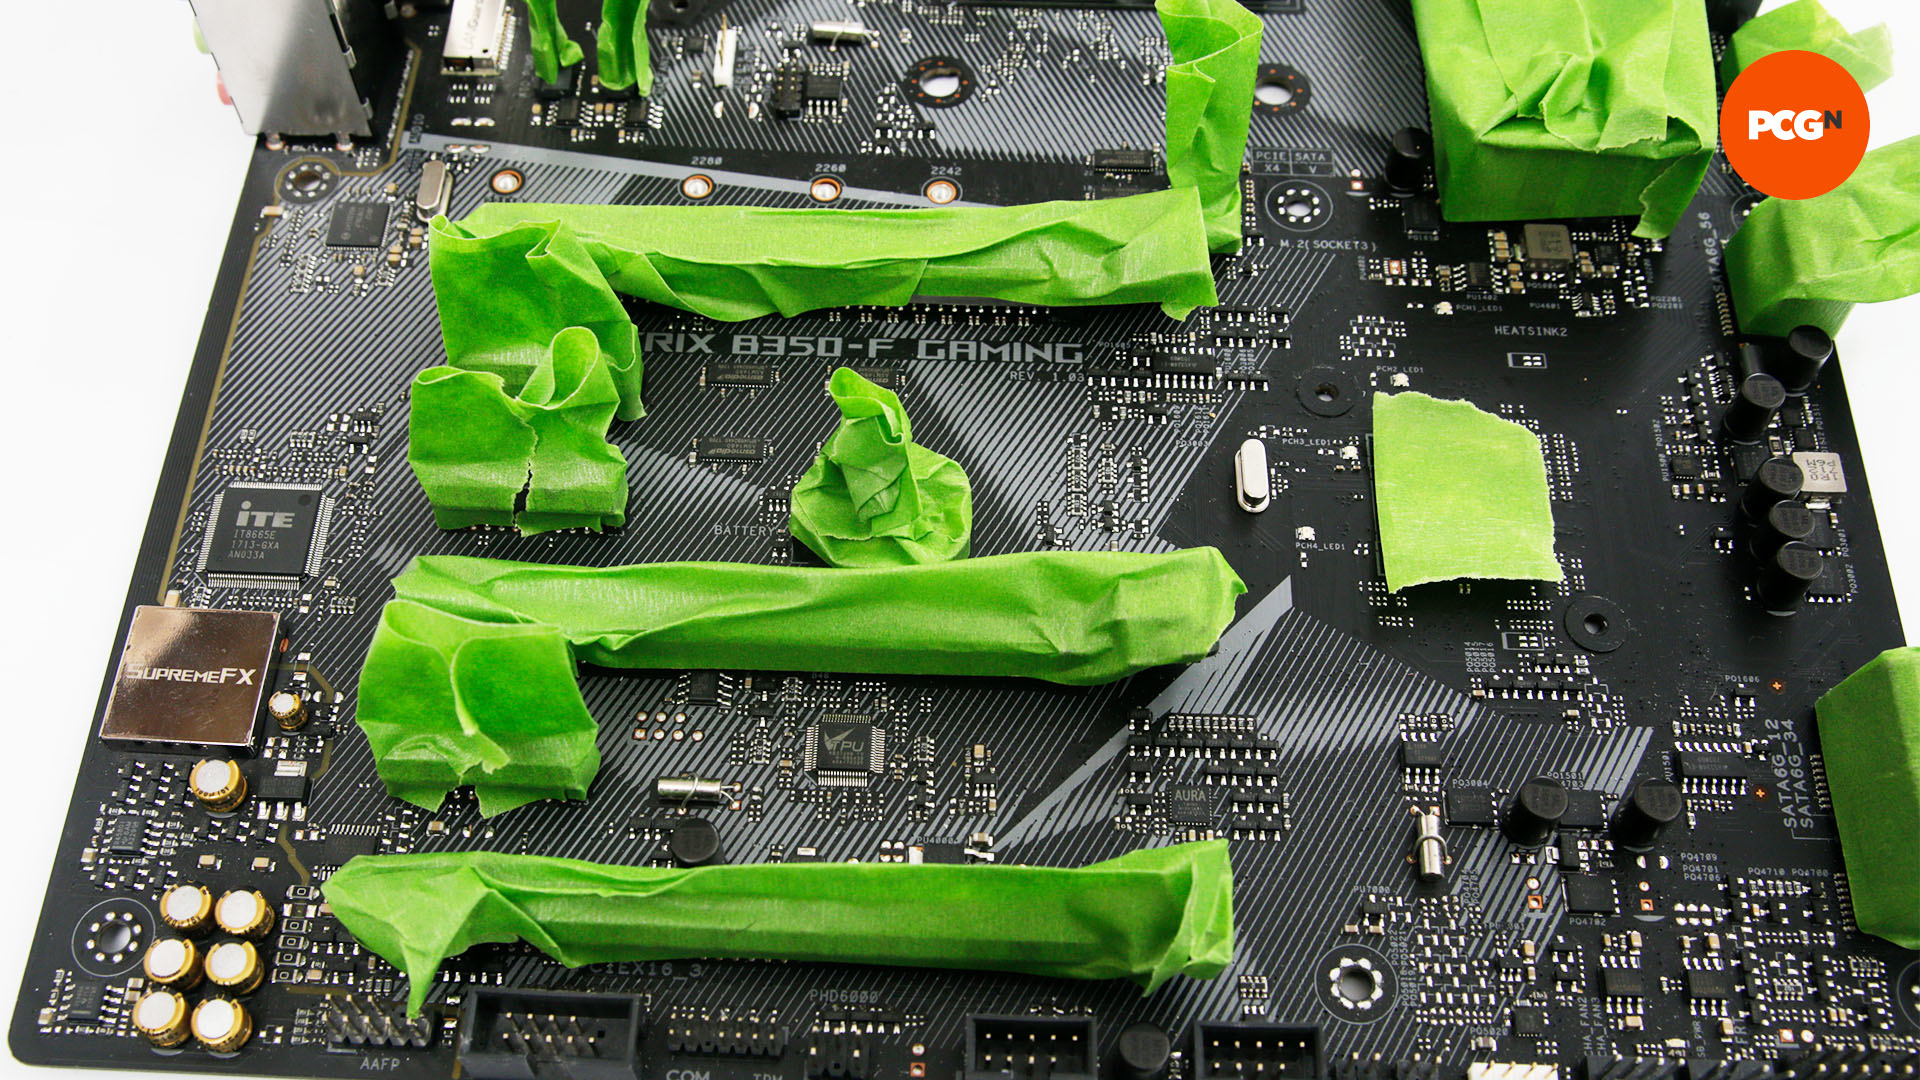 The RAM slots are covered in frog tape so the board can be painted